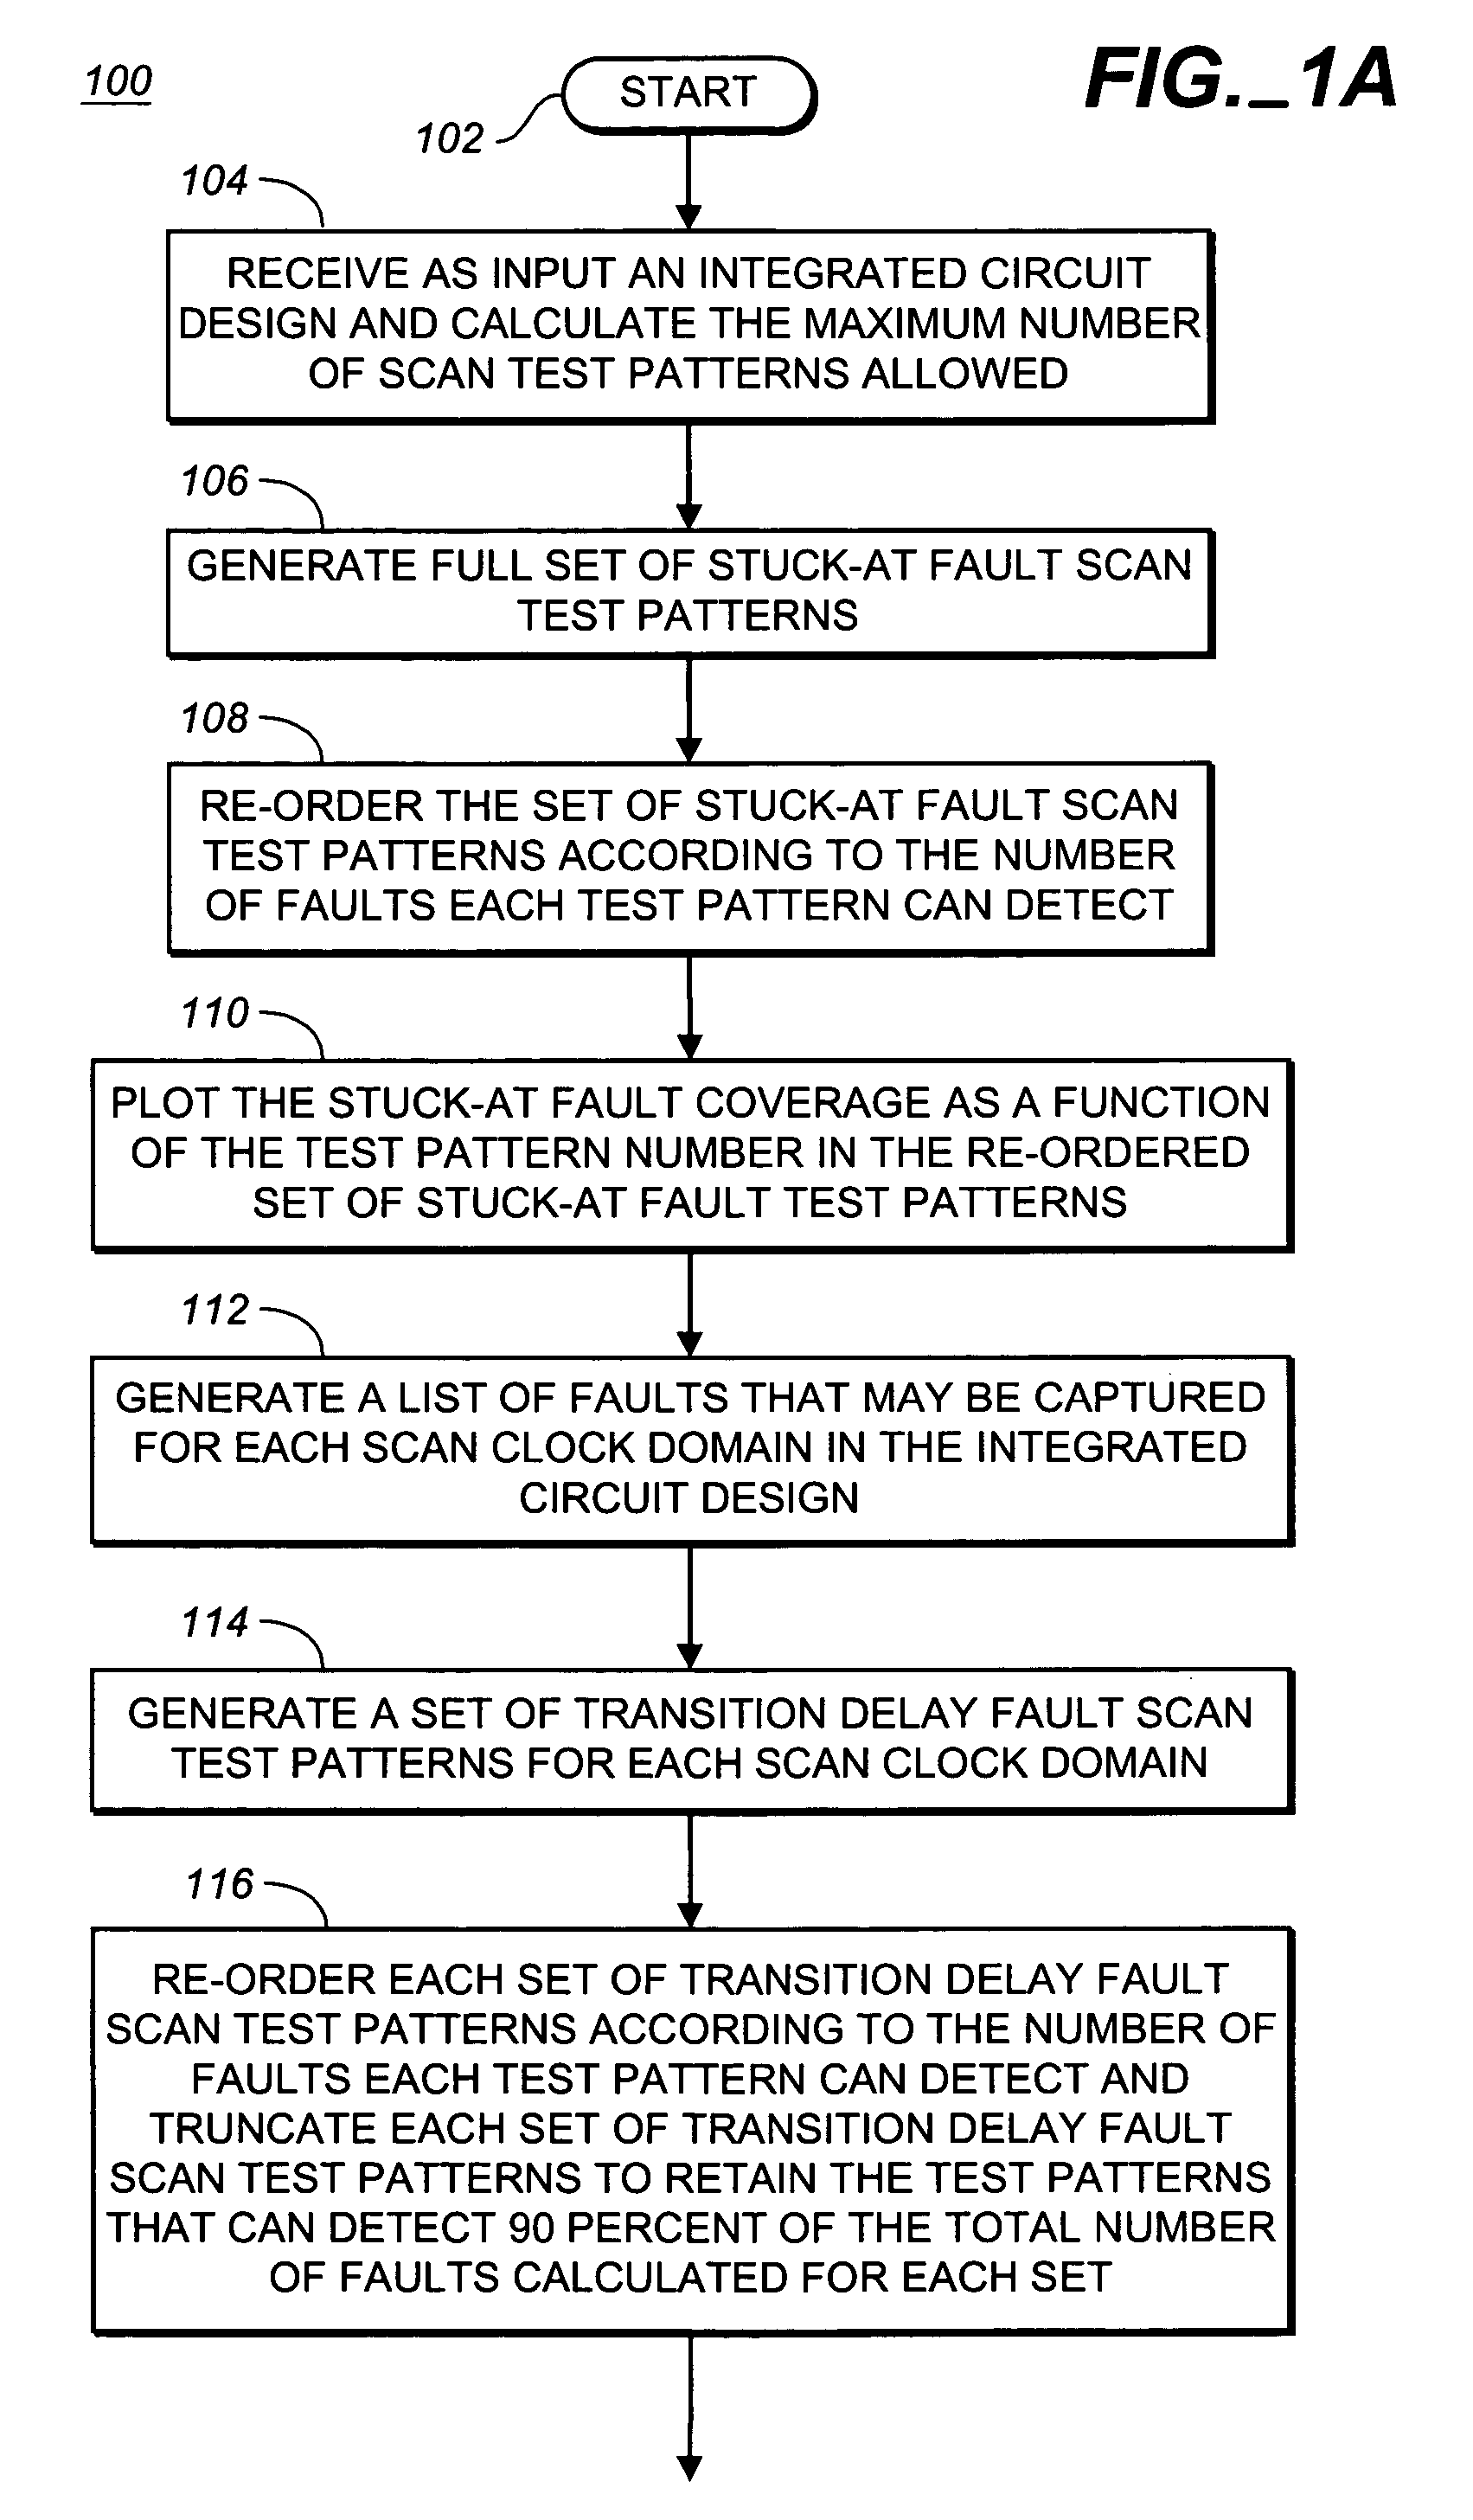 Method of generating an efficient stuck-at fault and transition delay fault truncated scan test pattern for an integrated circuit design